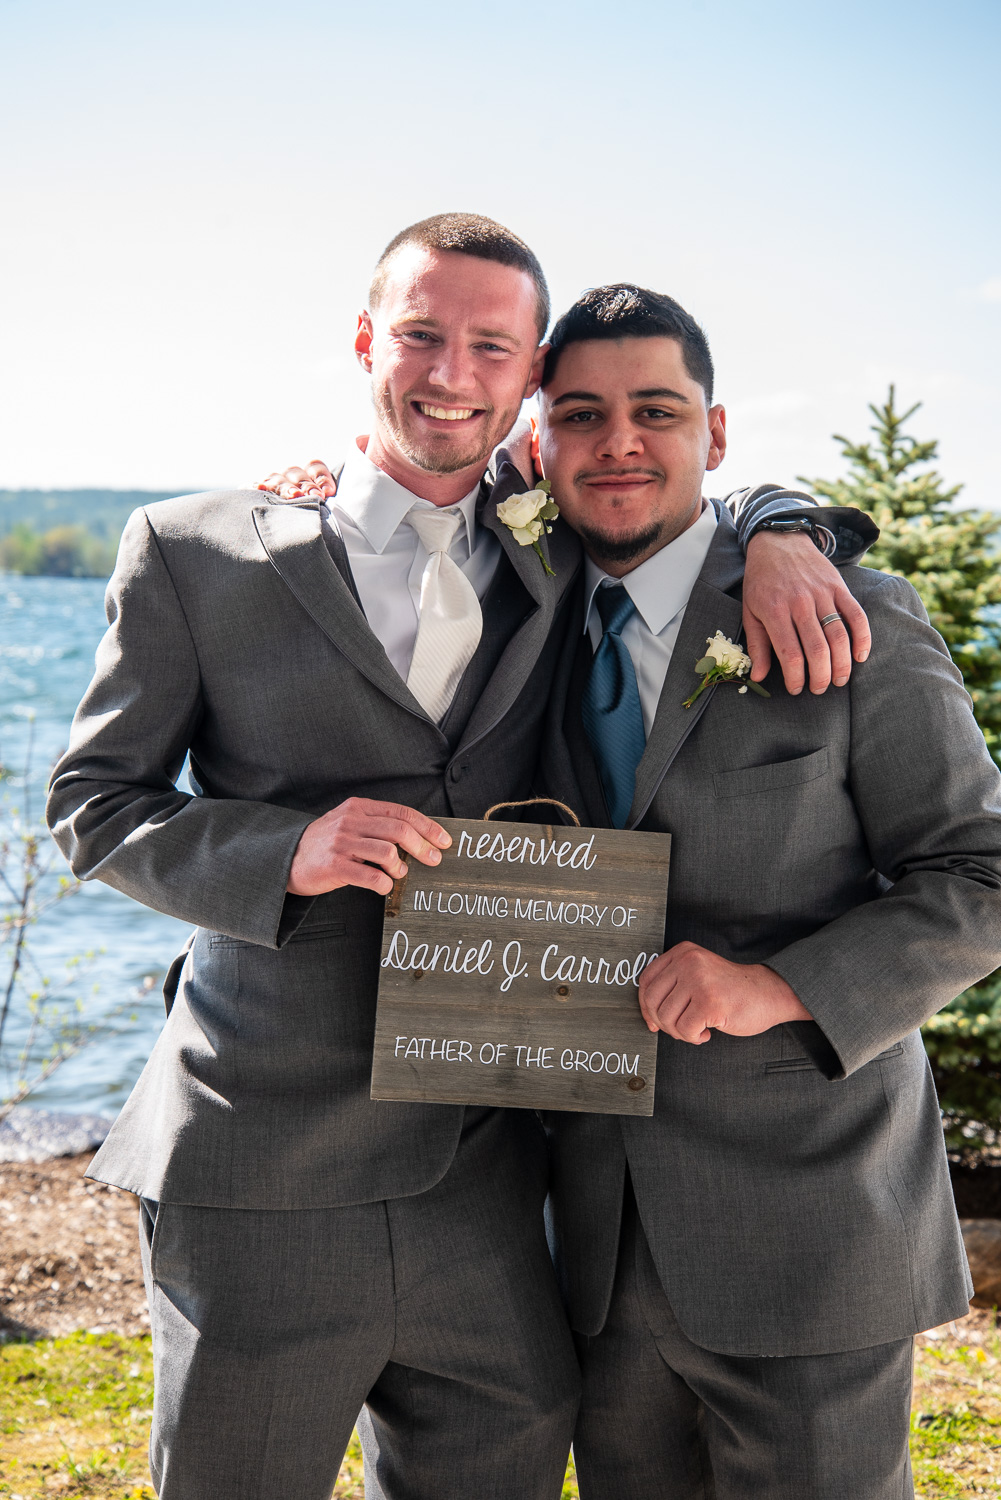 Groom and best man holding a sign in memory of the father of the groom after the lakeside wedding